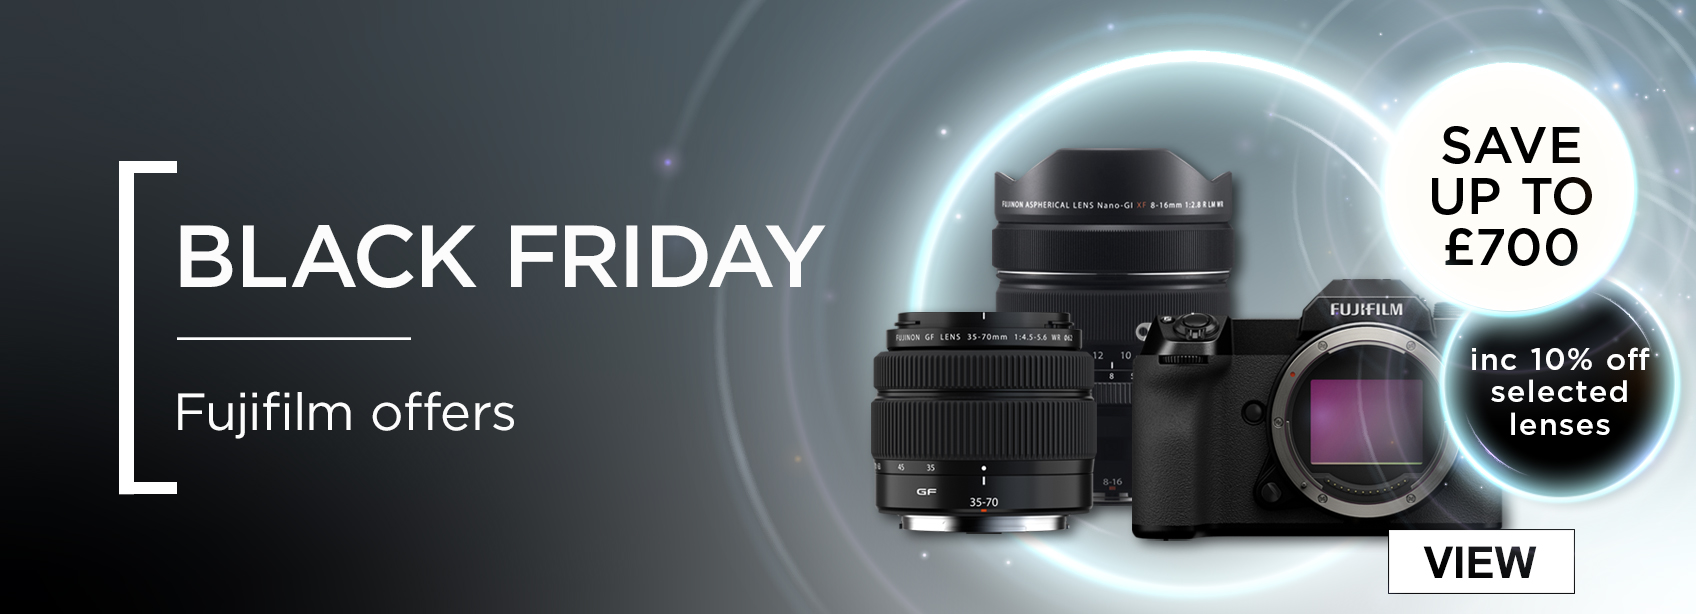 Black Friday - Fujifilm Offers. Save up to £700